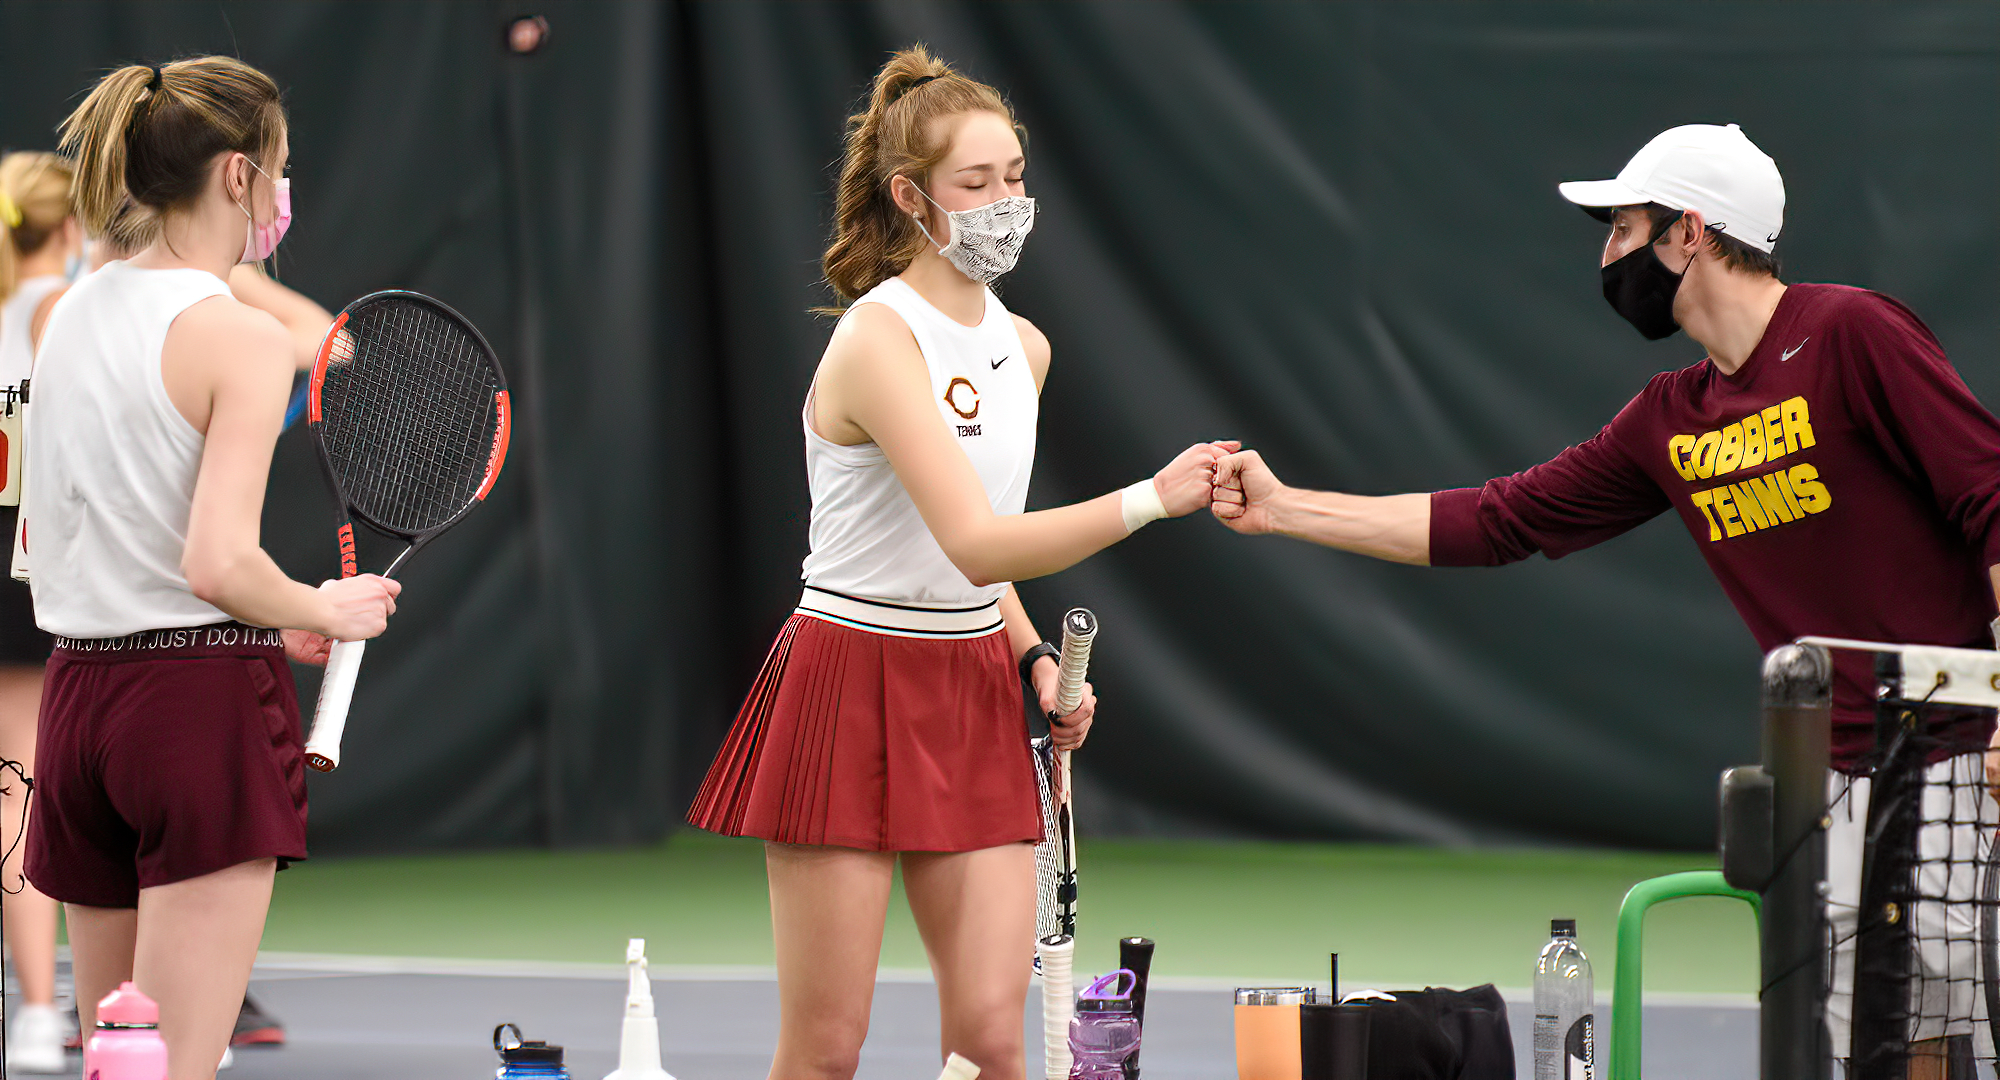 Raquel Egge (center) was one of two players to capture singles victories for the Cobbers in their match at St. Mary's. She won 6-3, 6-1 at No.1 singles.